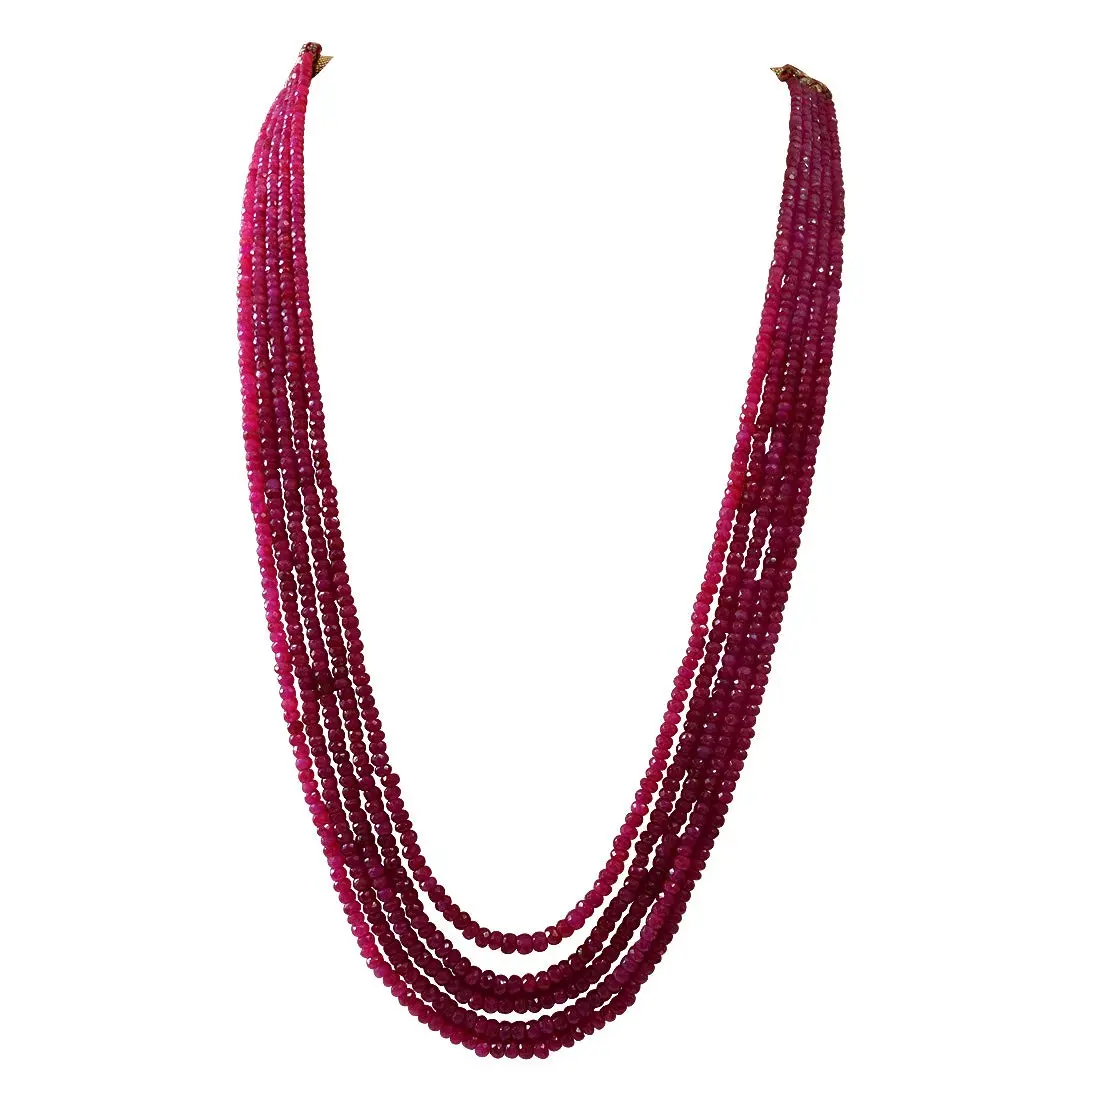 433.352cts 5 line Faceted Red Ruby Beads Necklace for Women (433.352cts Ruby Neck)